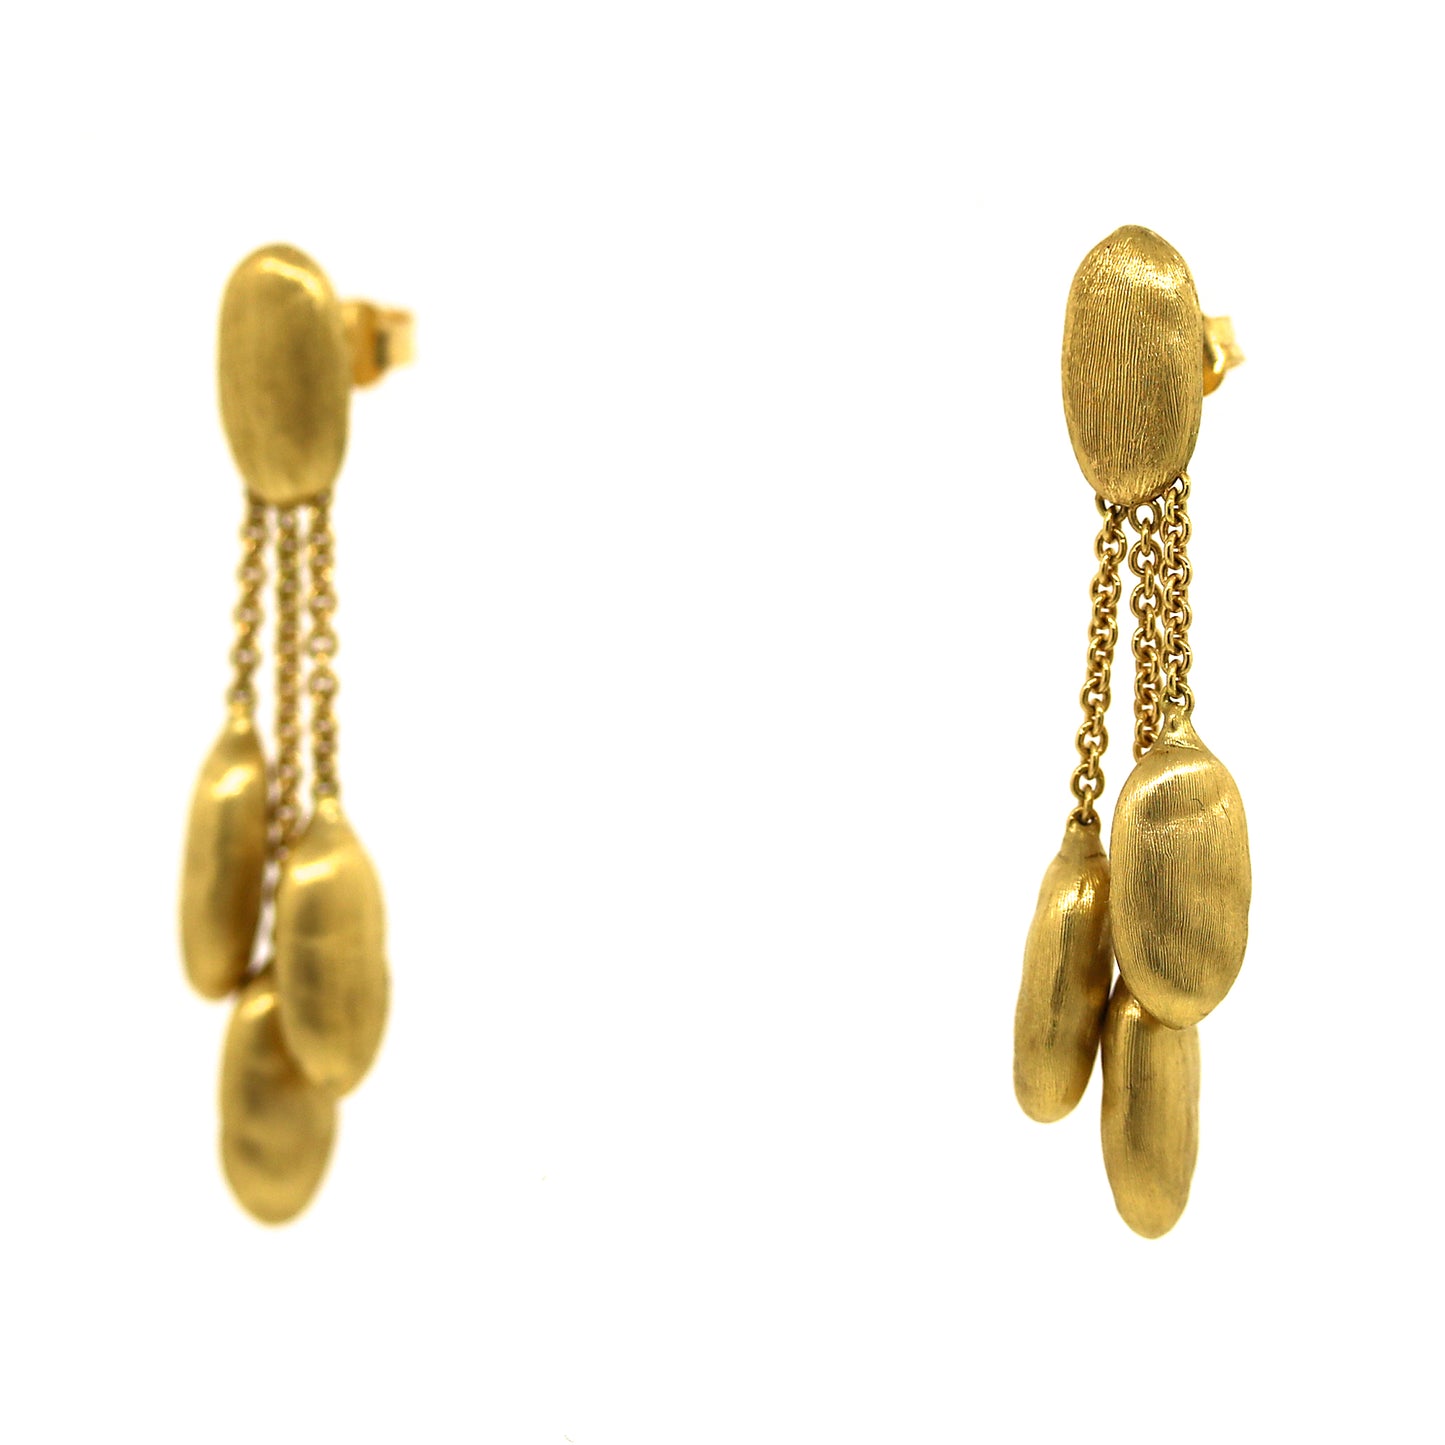 Preowned Marco Bicego 18kt Yellow Gold Hanging Earrings